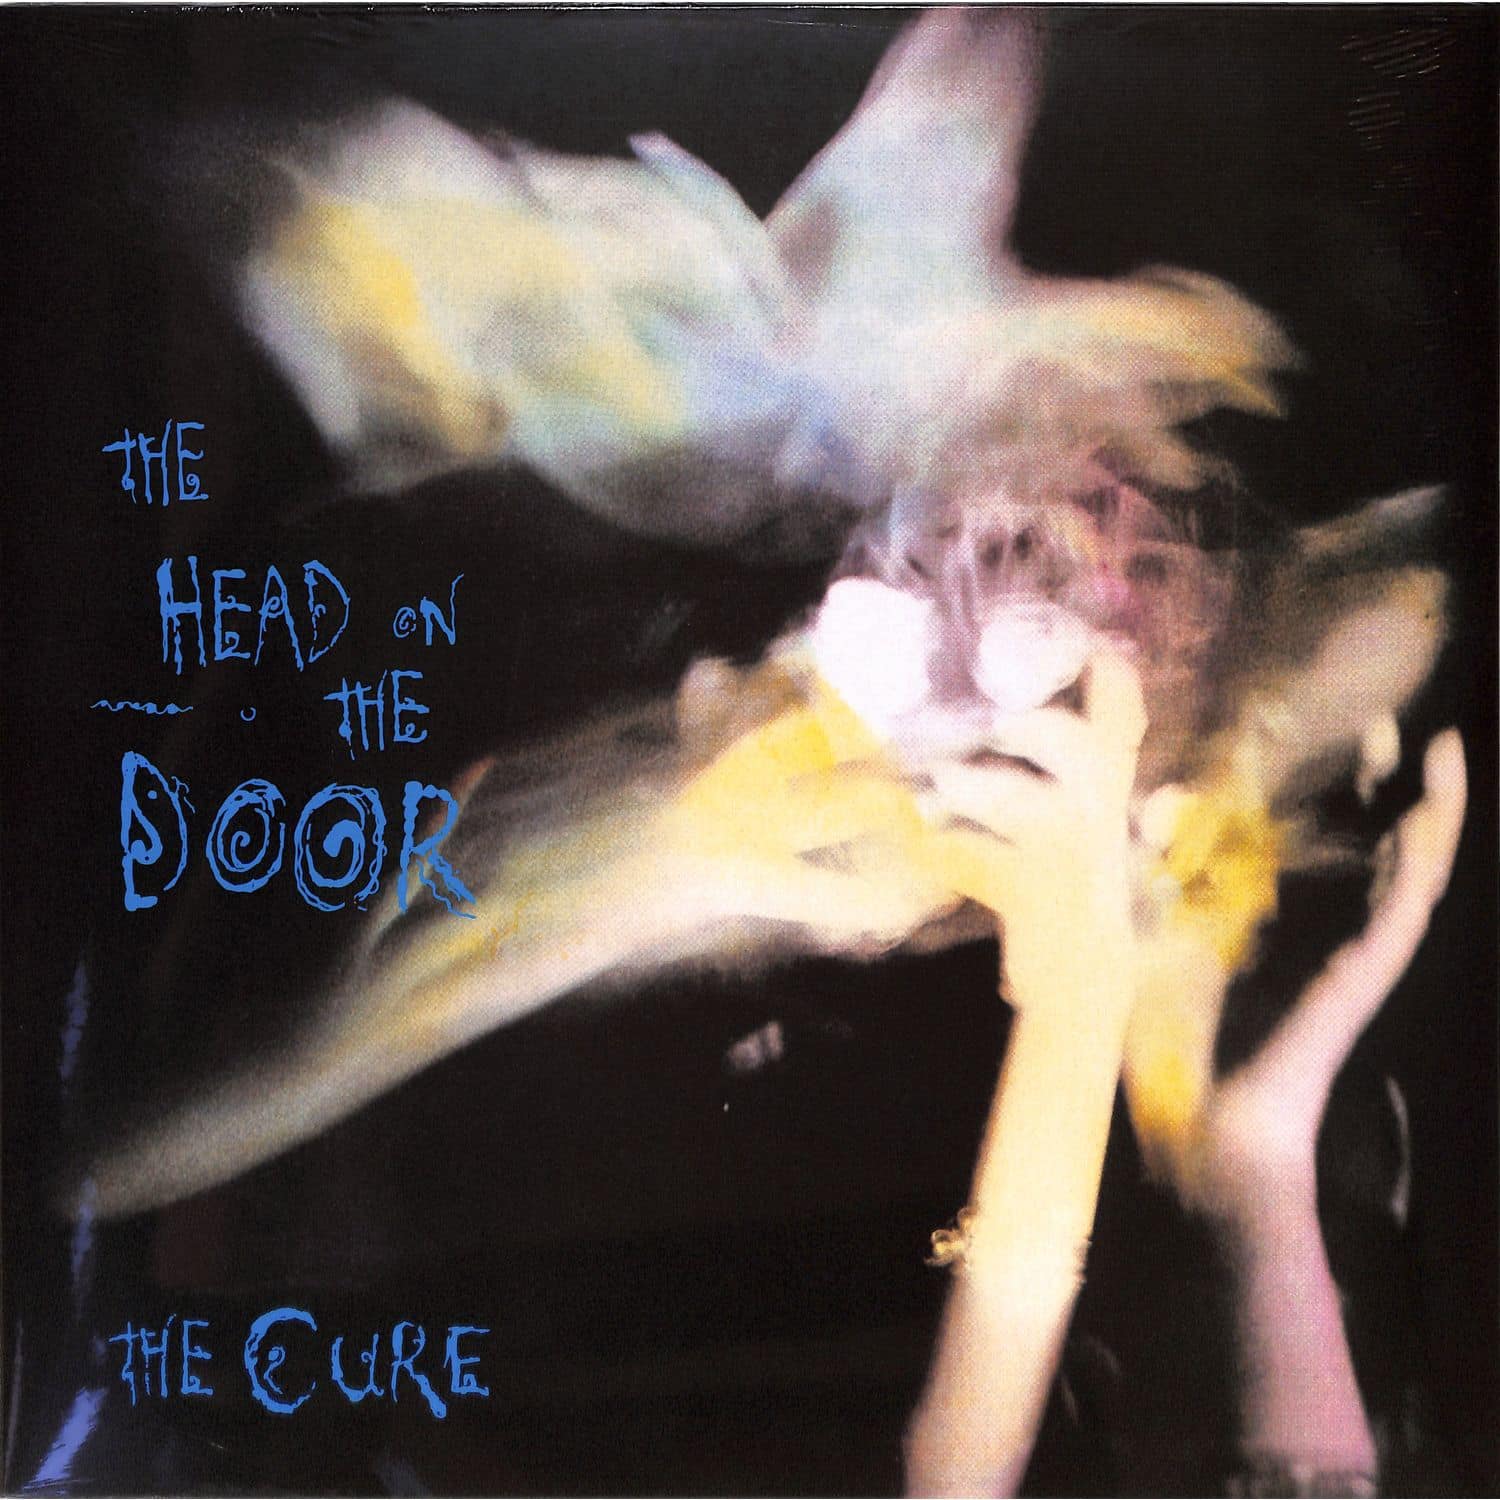 The Cure - THE HEAD ON THE DOOR 